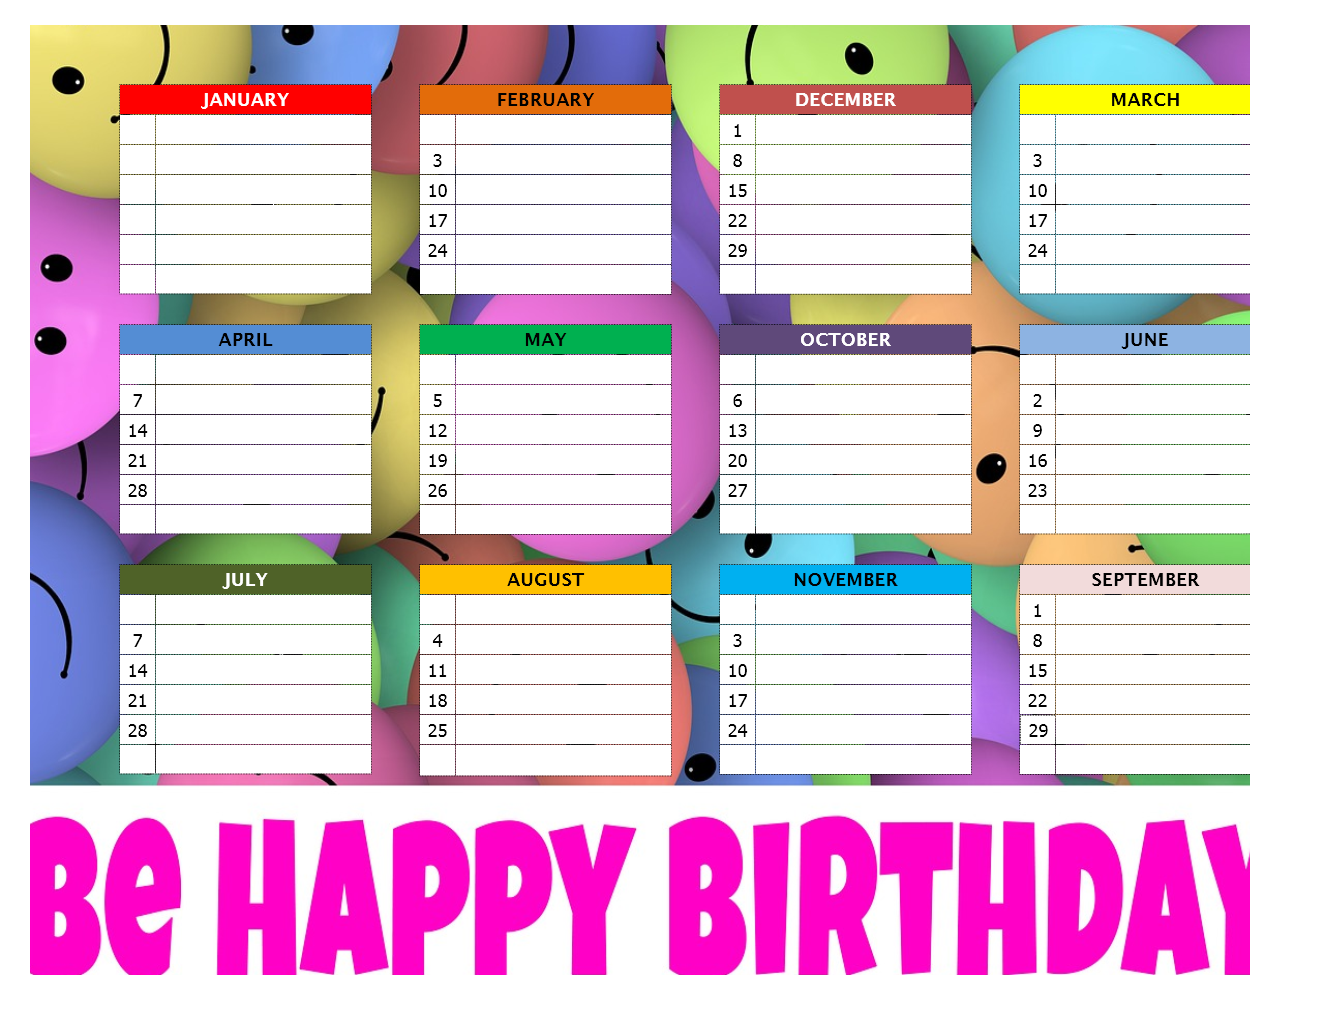 birthday chart template word Archives